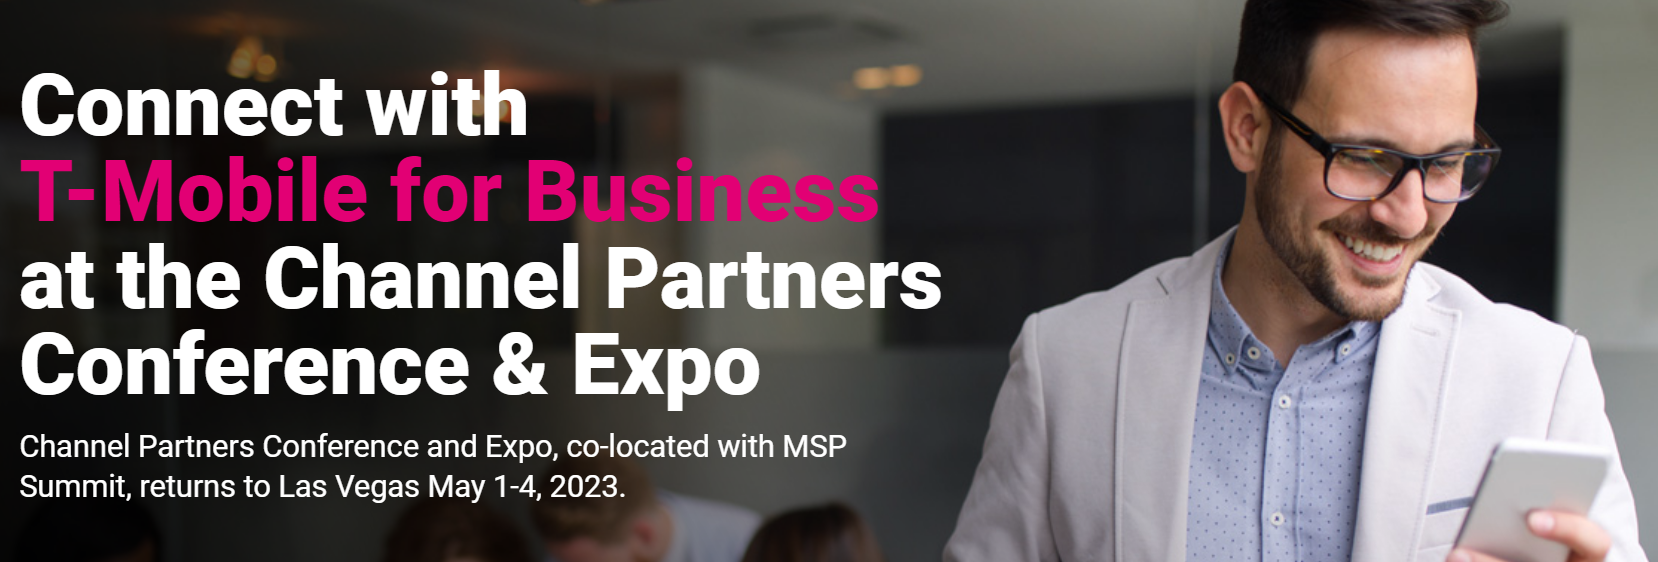 T-Mobile for Business Event Guide